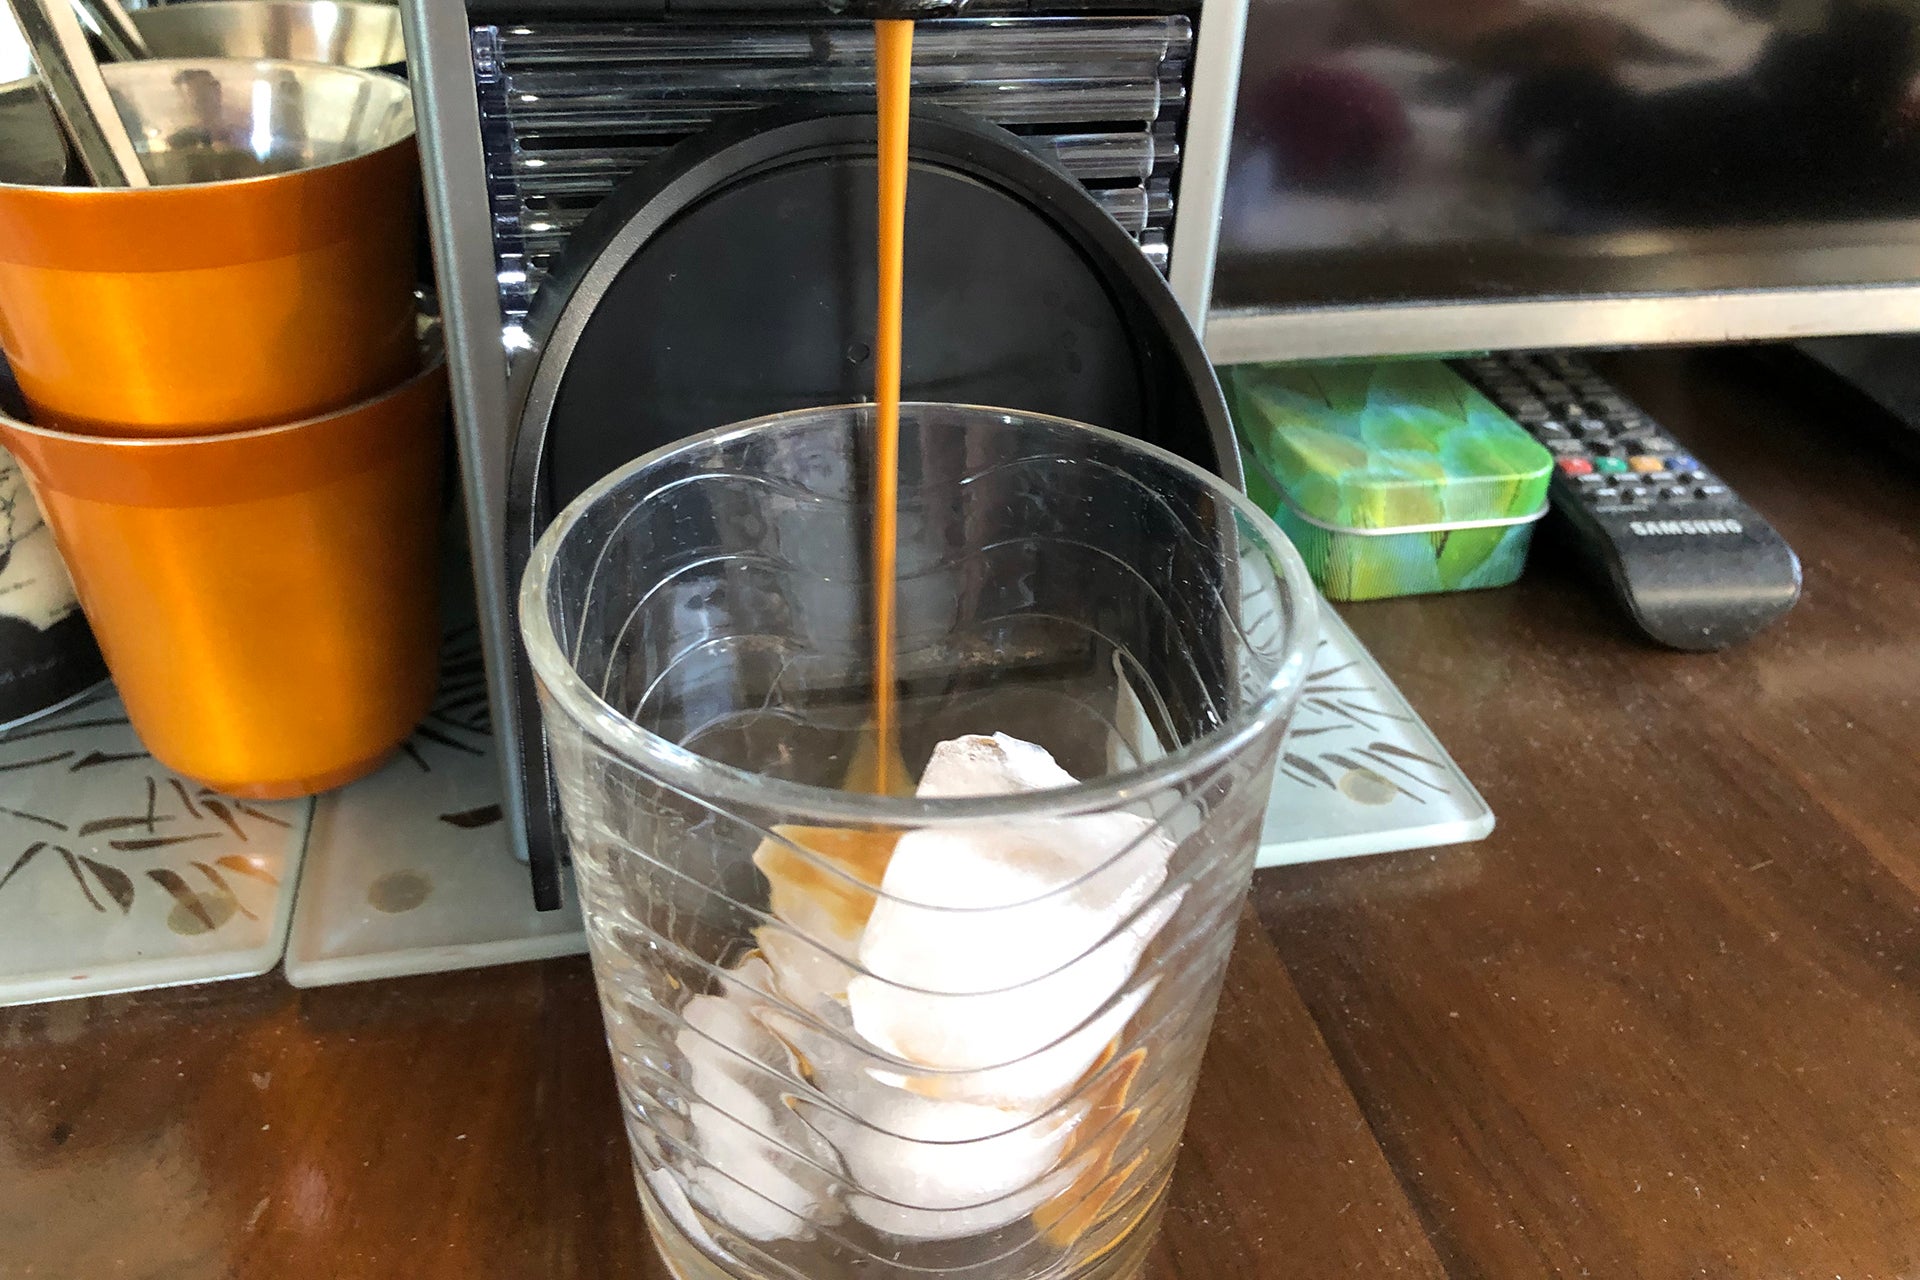 https://www.trustedreviews.com/wp-content/uploads/sites/54/2021/06/Making-iced-coffee.jpeg